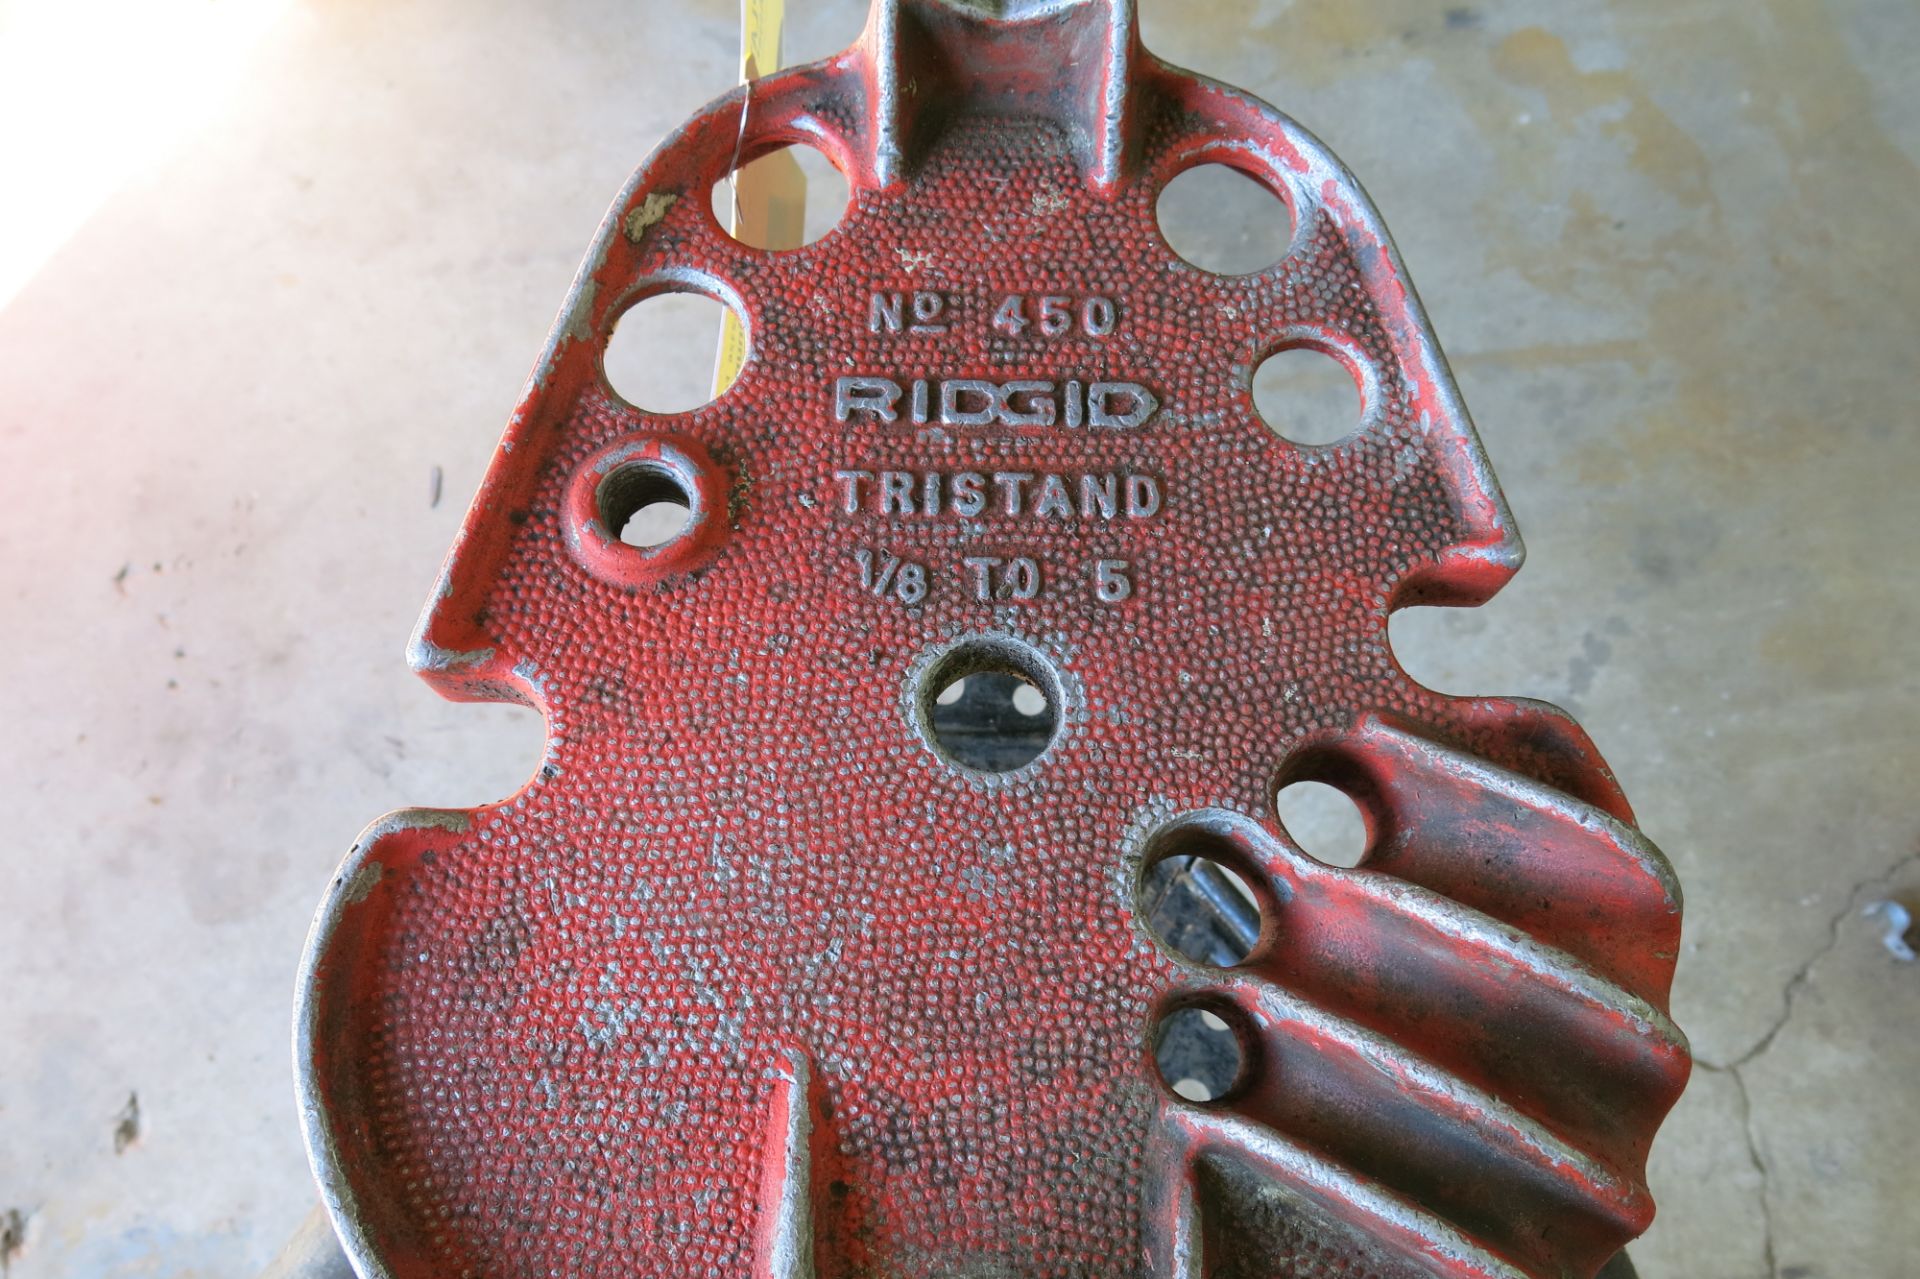 RIDGID, 450, TRISTAND, 1/8" TO 5", PORTABLE BENCH VISE (LOCATED IN MISSISSAUGA) - Image 3 of 3